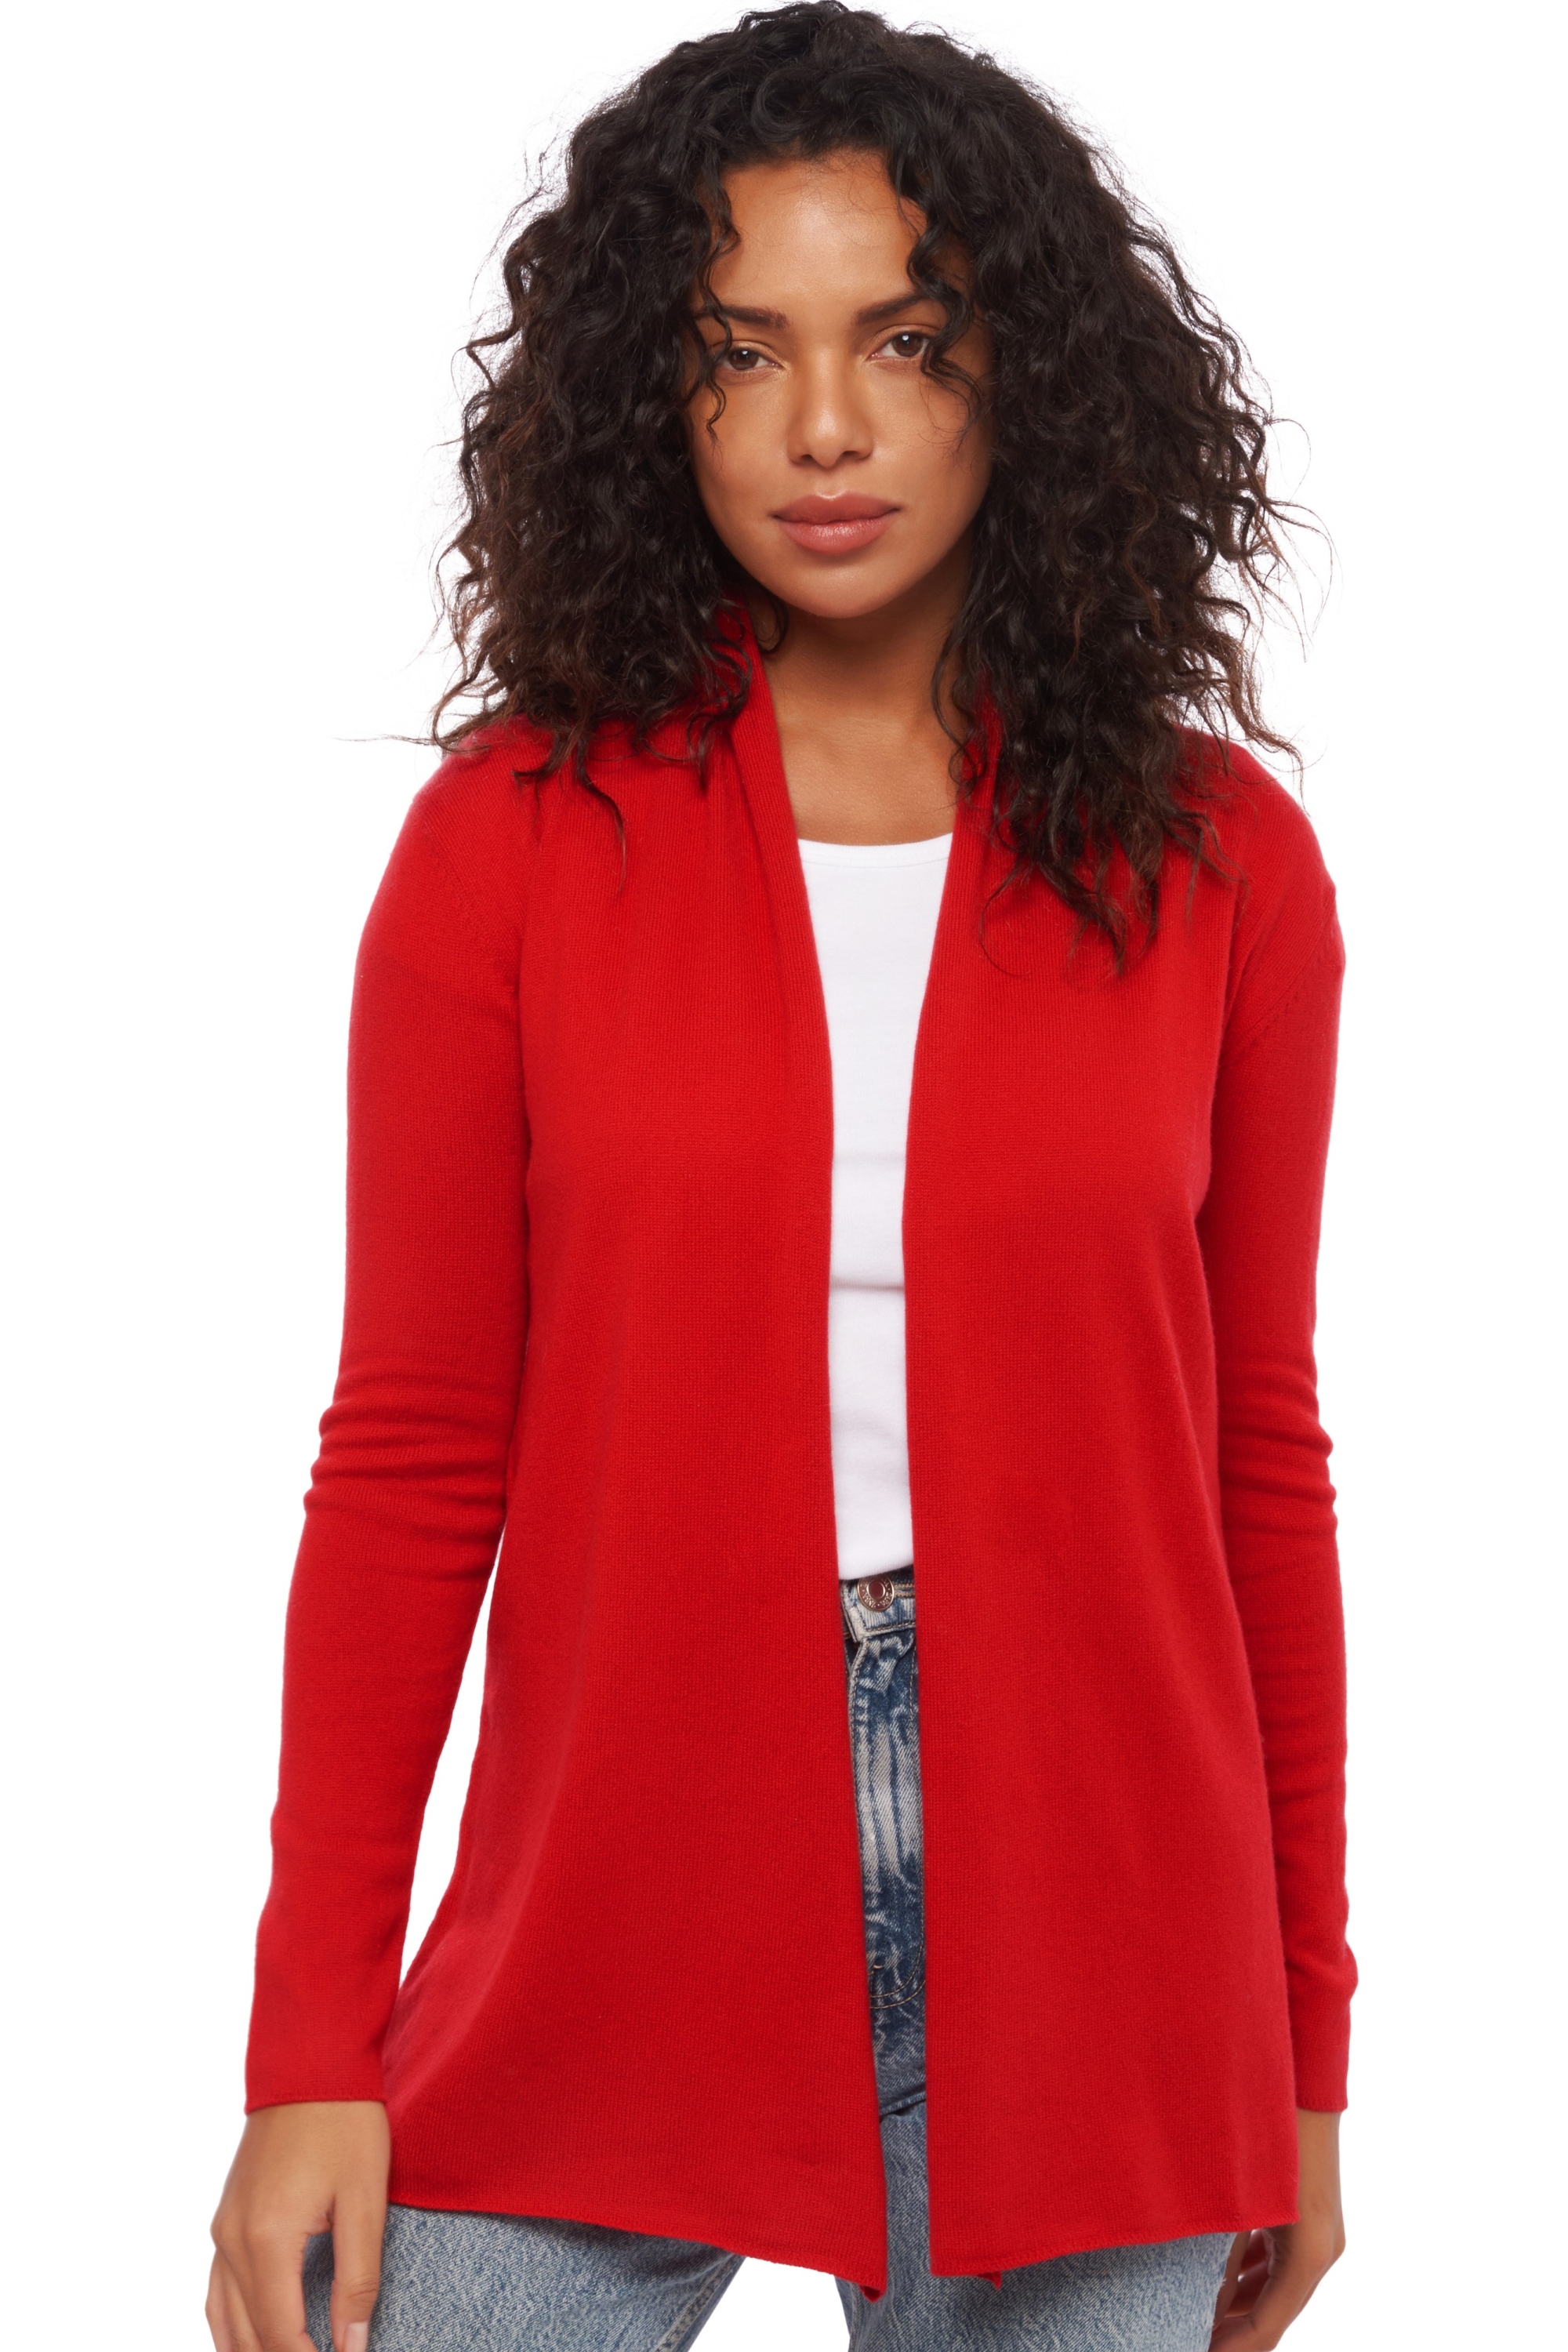 Cashmere ladies pucci blood red s